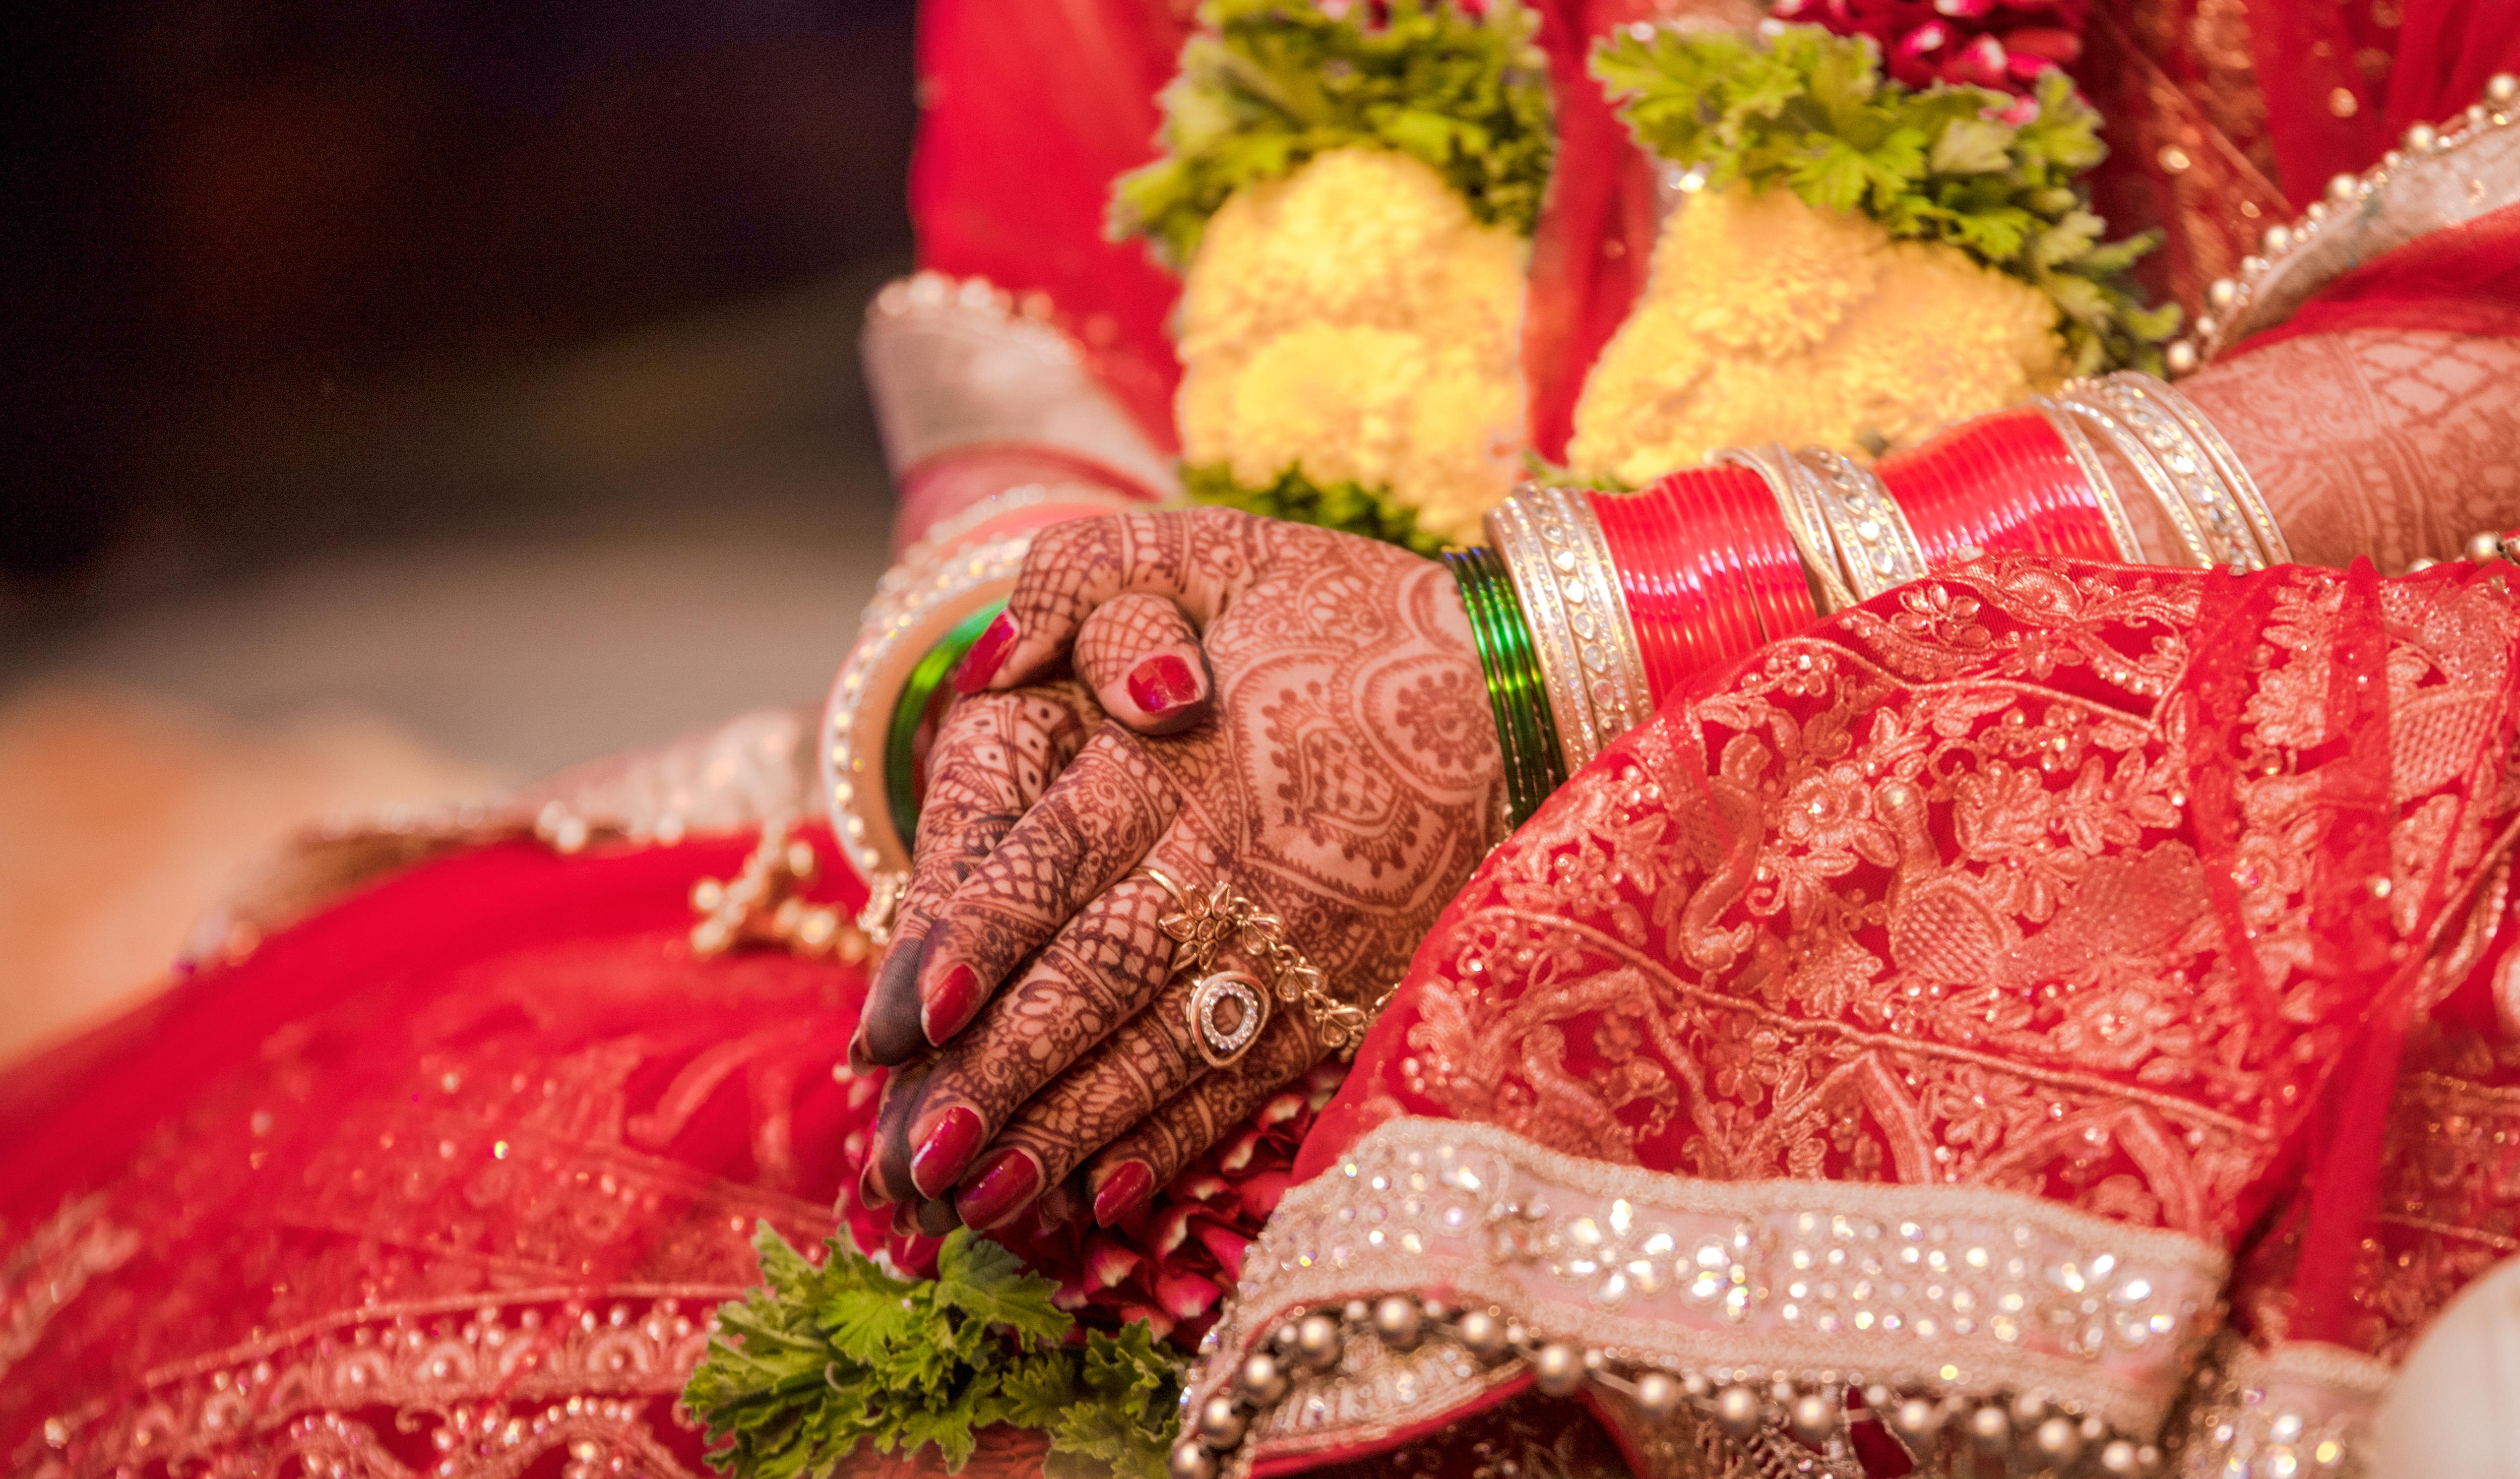 How dowries are fueling violence against women